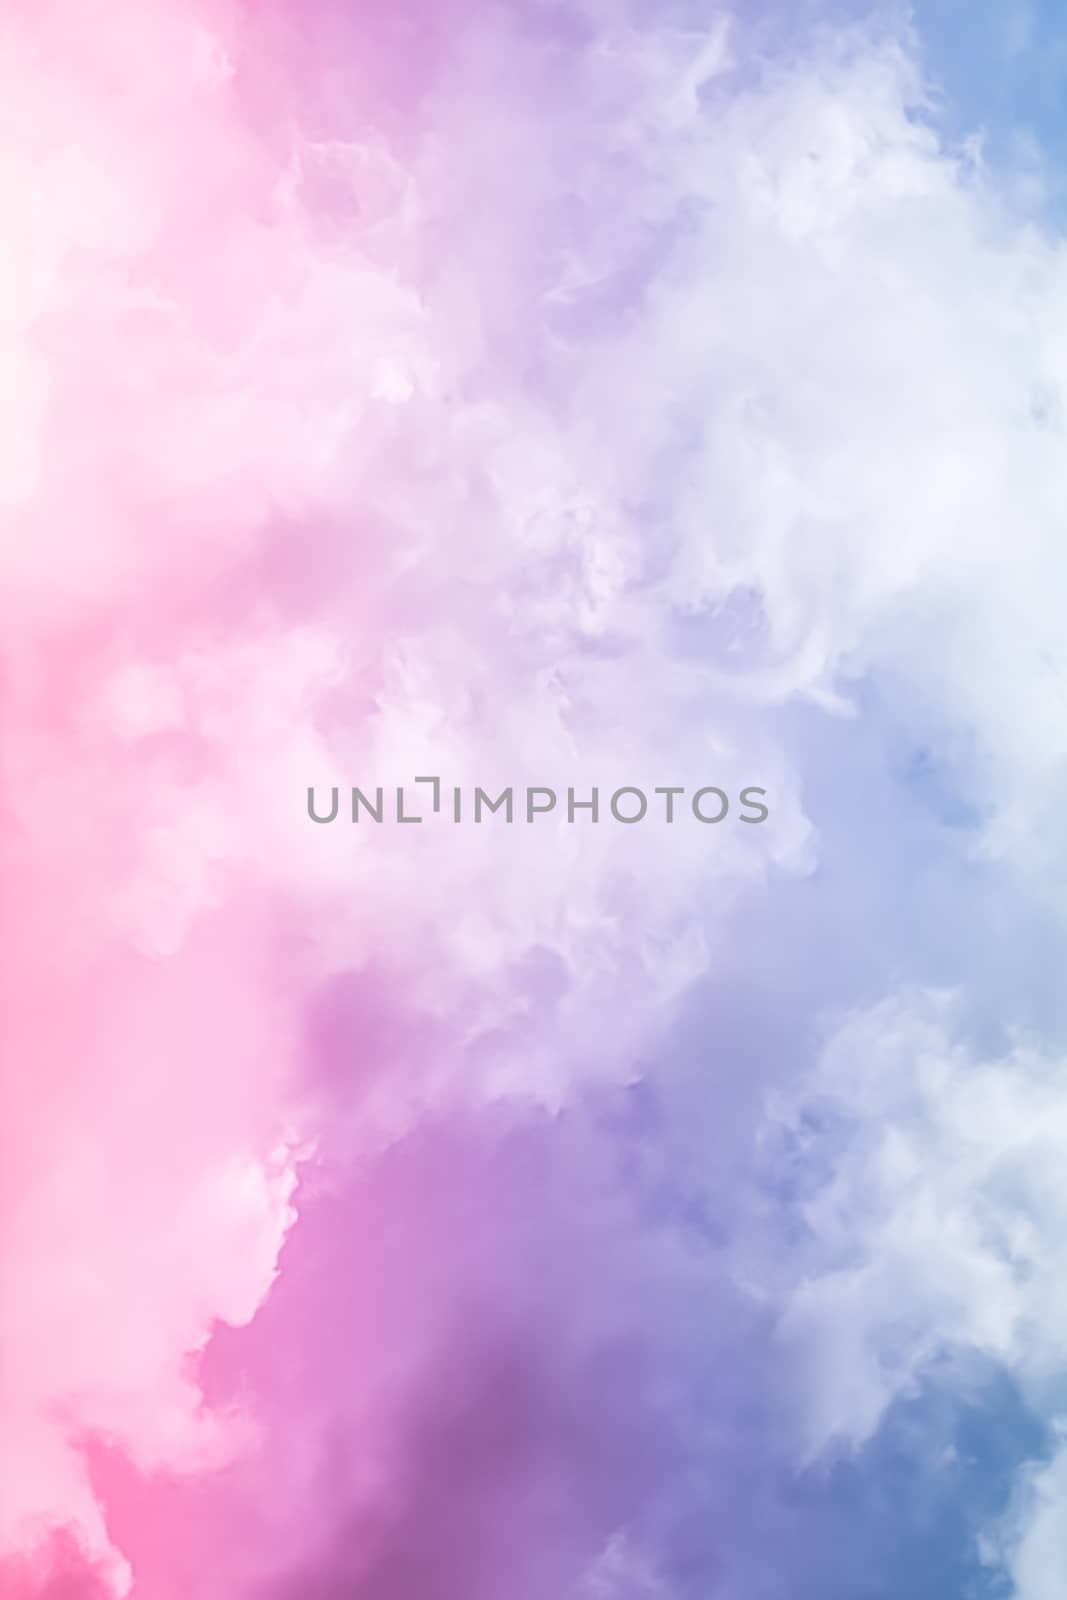 Fantasy pink and blue sky, spiritual and nature background by Anneleven